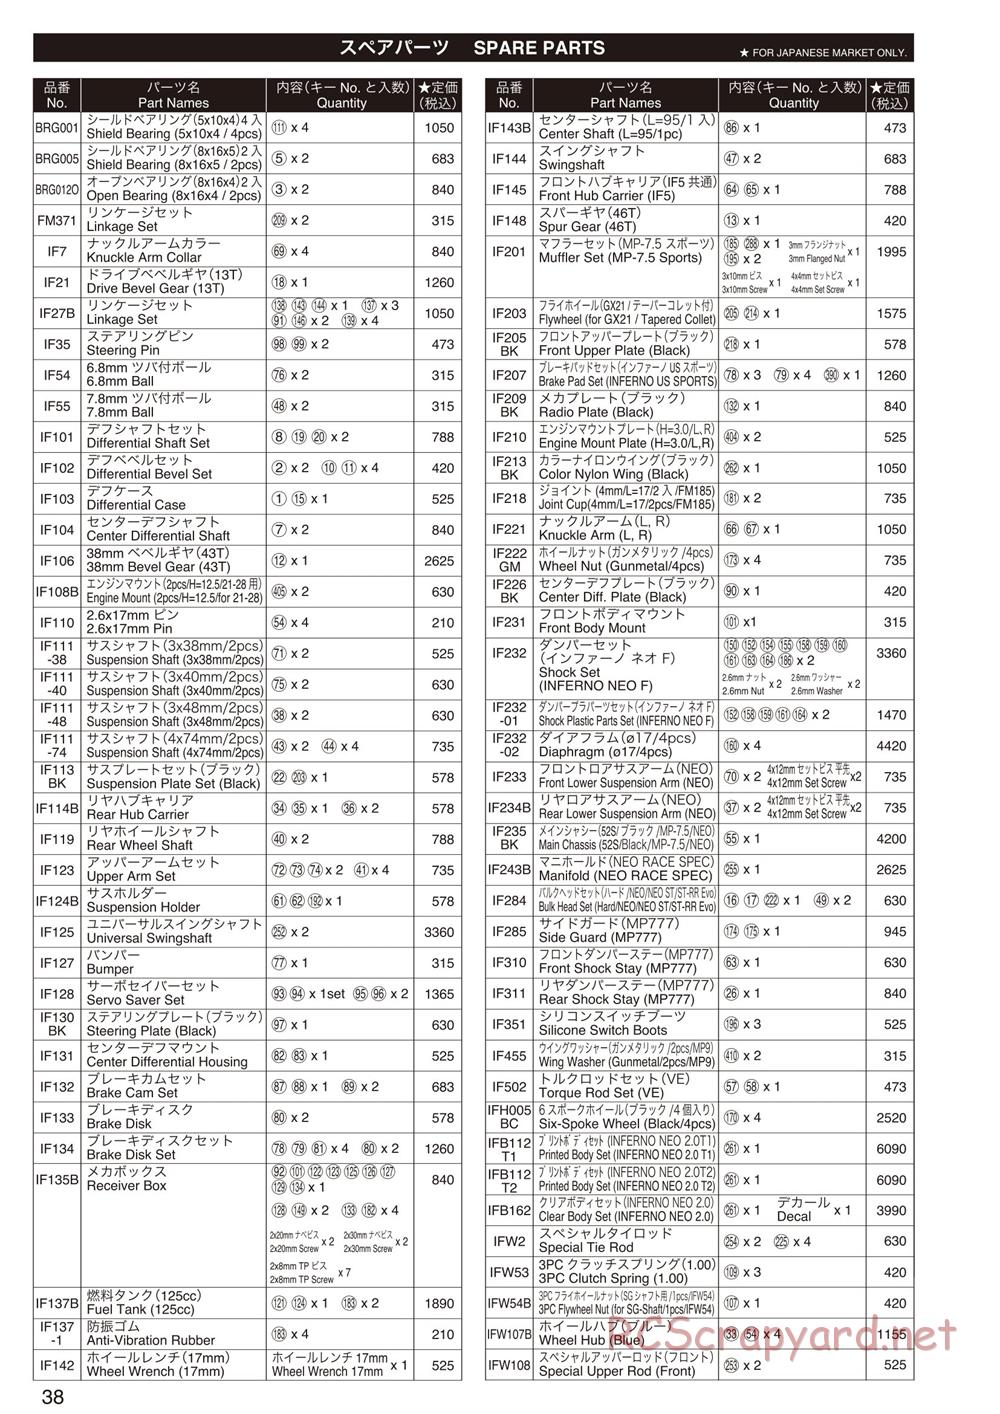 Kyosho - Inferno Neo 2.0 - Parts List - Page 1